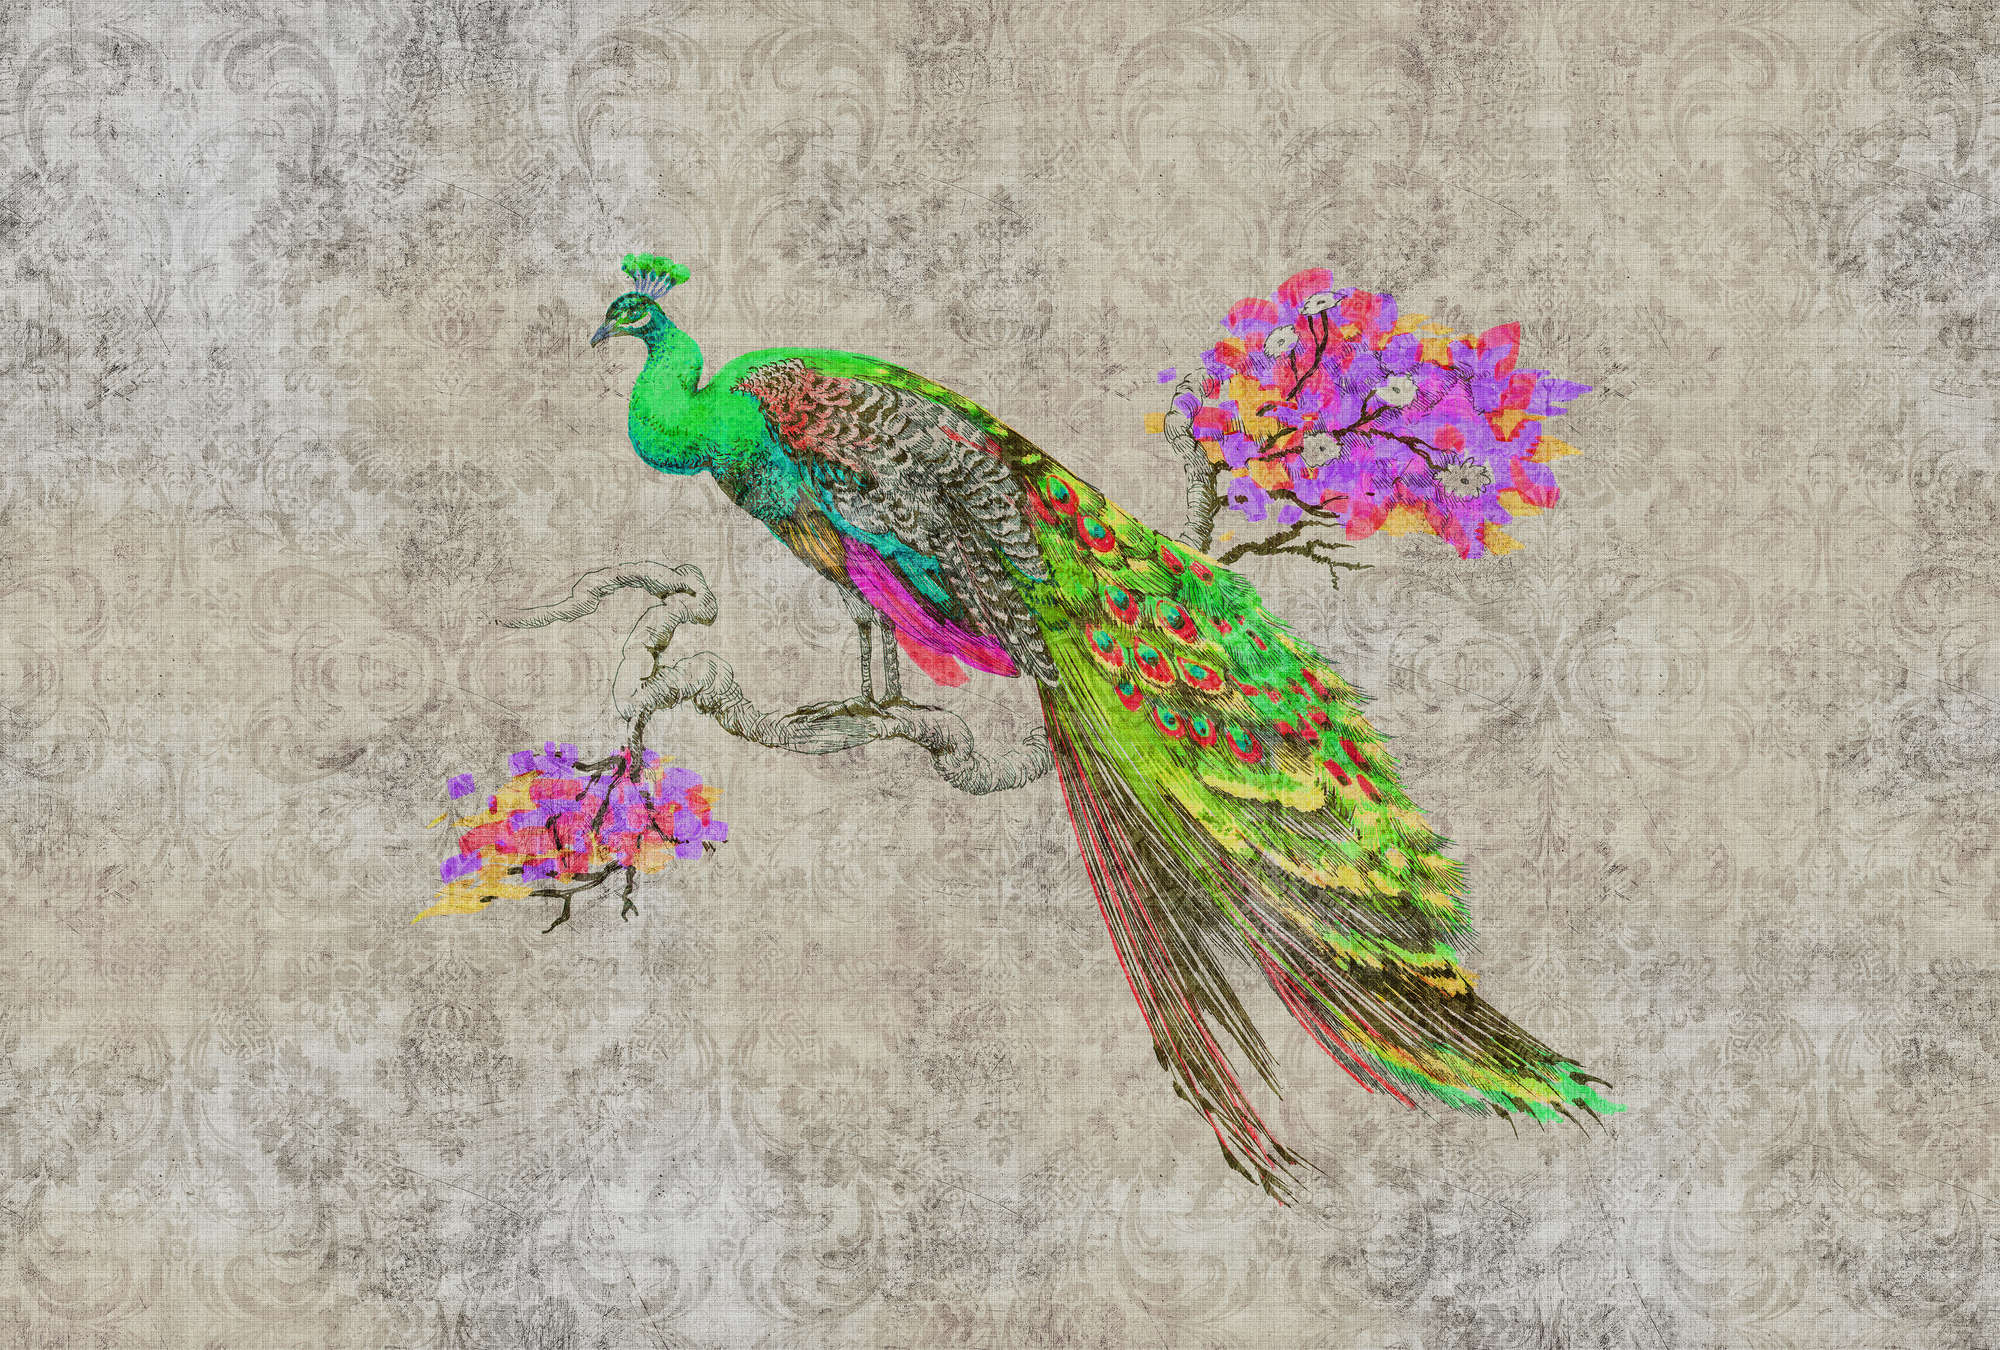             Peacock 1 - Photo wallpaper in natural linen structure with peacock in neon colours - Green, Pink | Matt smooth fleece
        